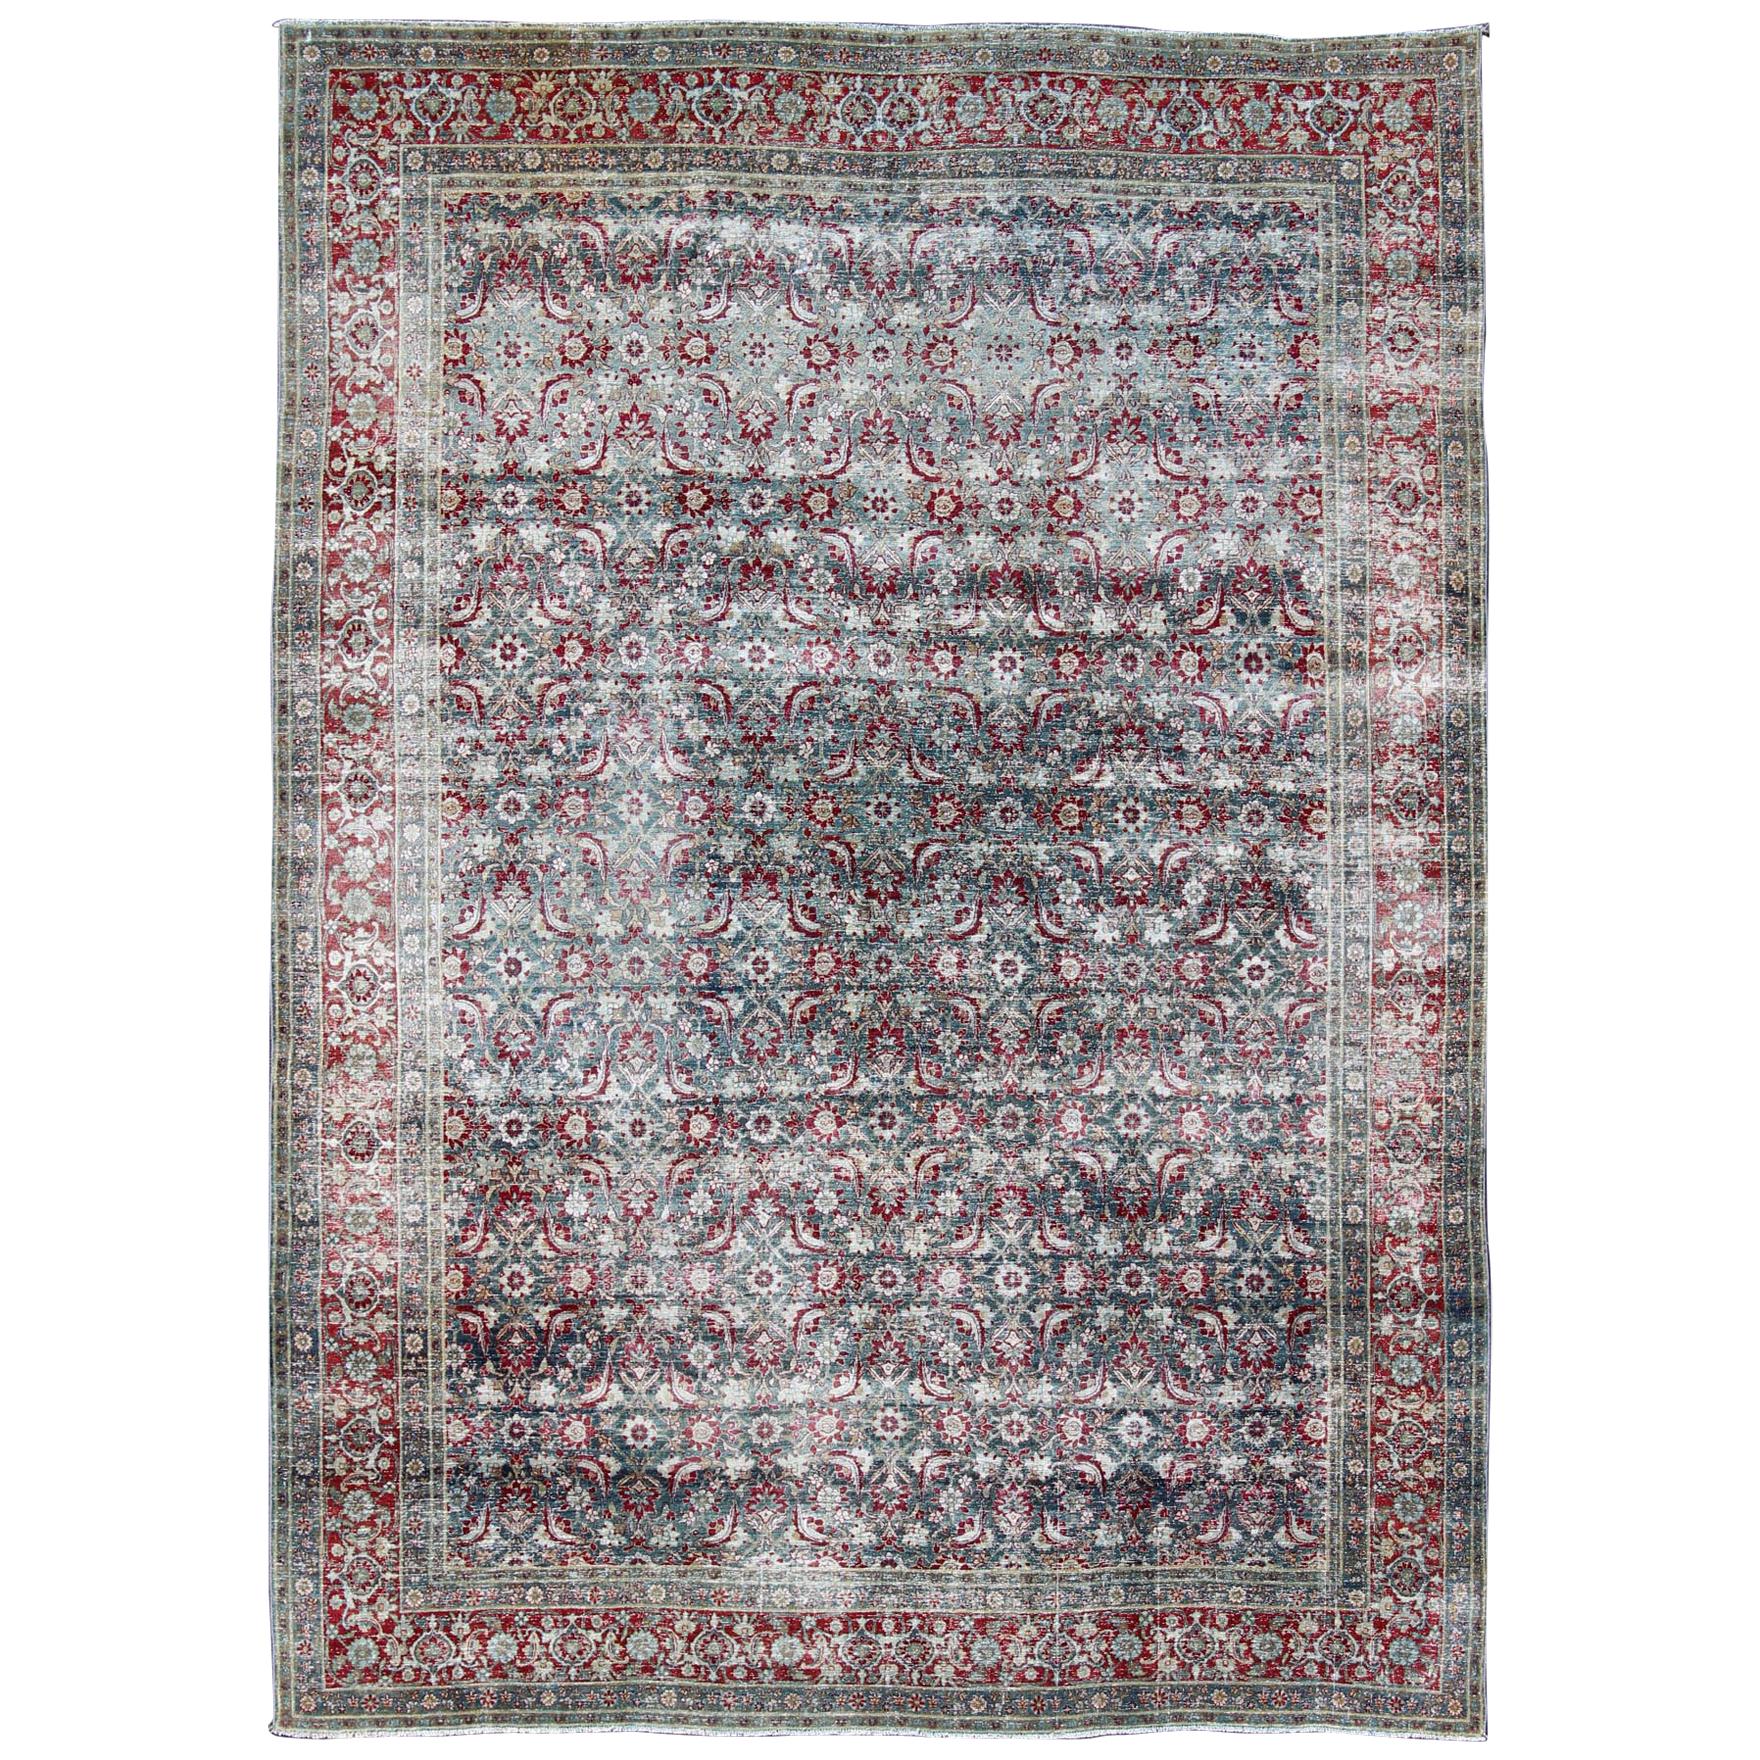 Antique Persian Yazd Rug with Floral-Geometric Design in Red and Blue